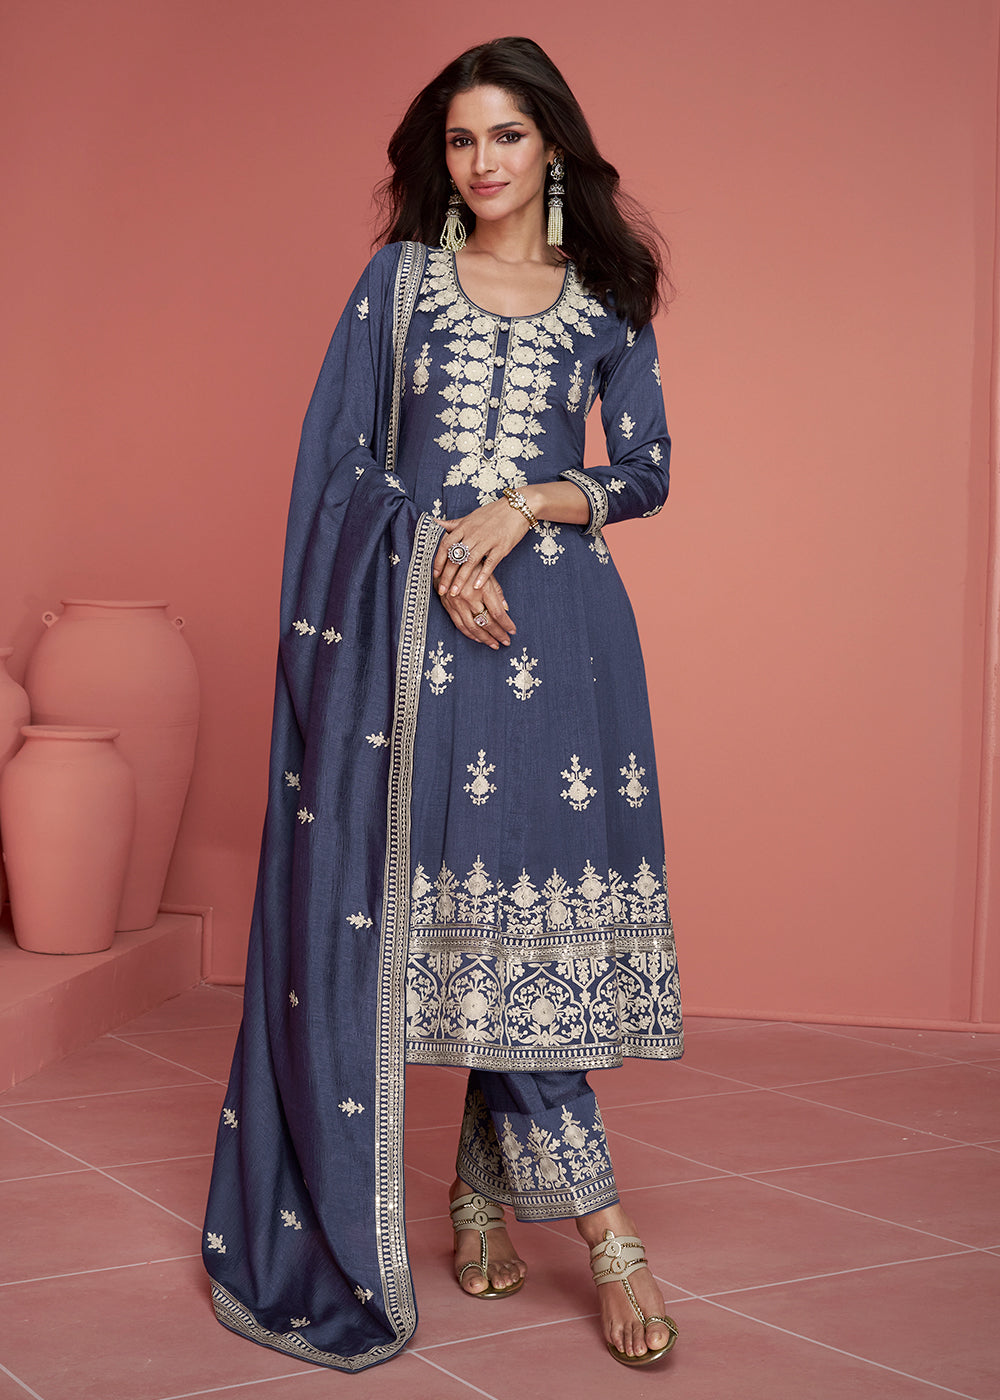 Buy Now Punjabi Style Silk Embroidered Salwar Suit in Lavender Blue Online in USA, UK, Canada, Germany, Australia & Worldwide at Empress Clothing.